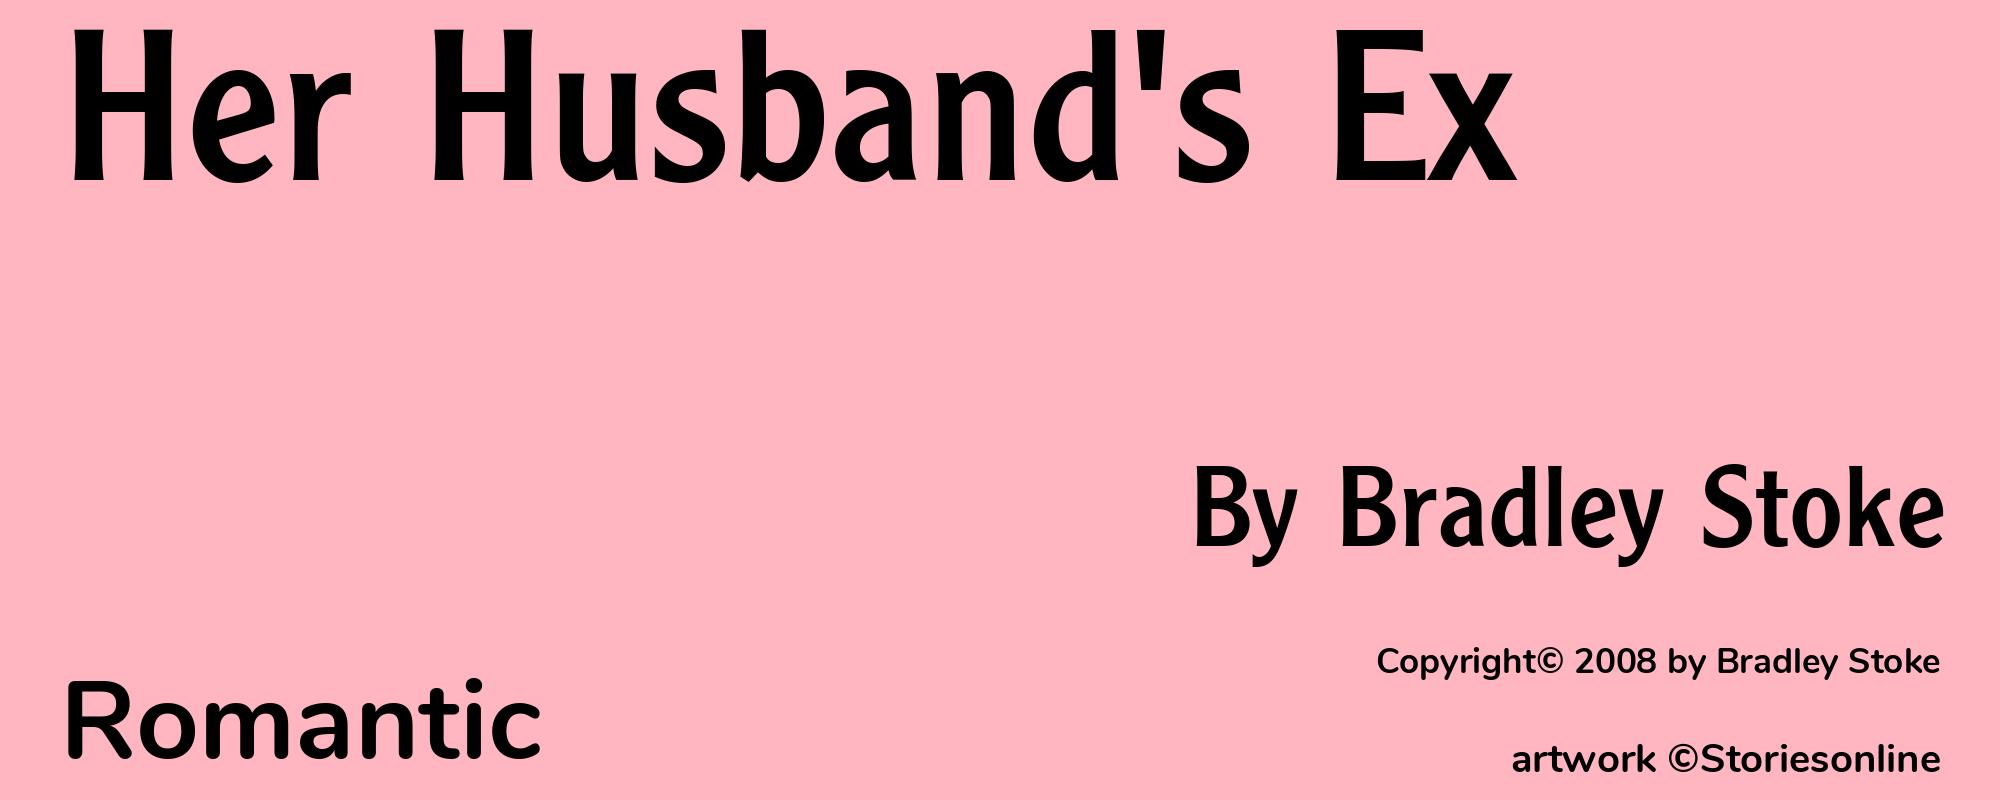 Her Husband's Ex - Cover